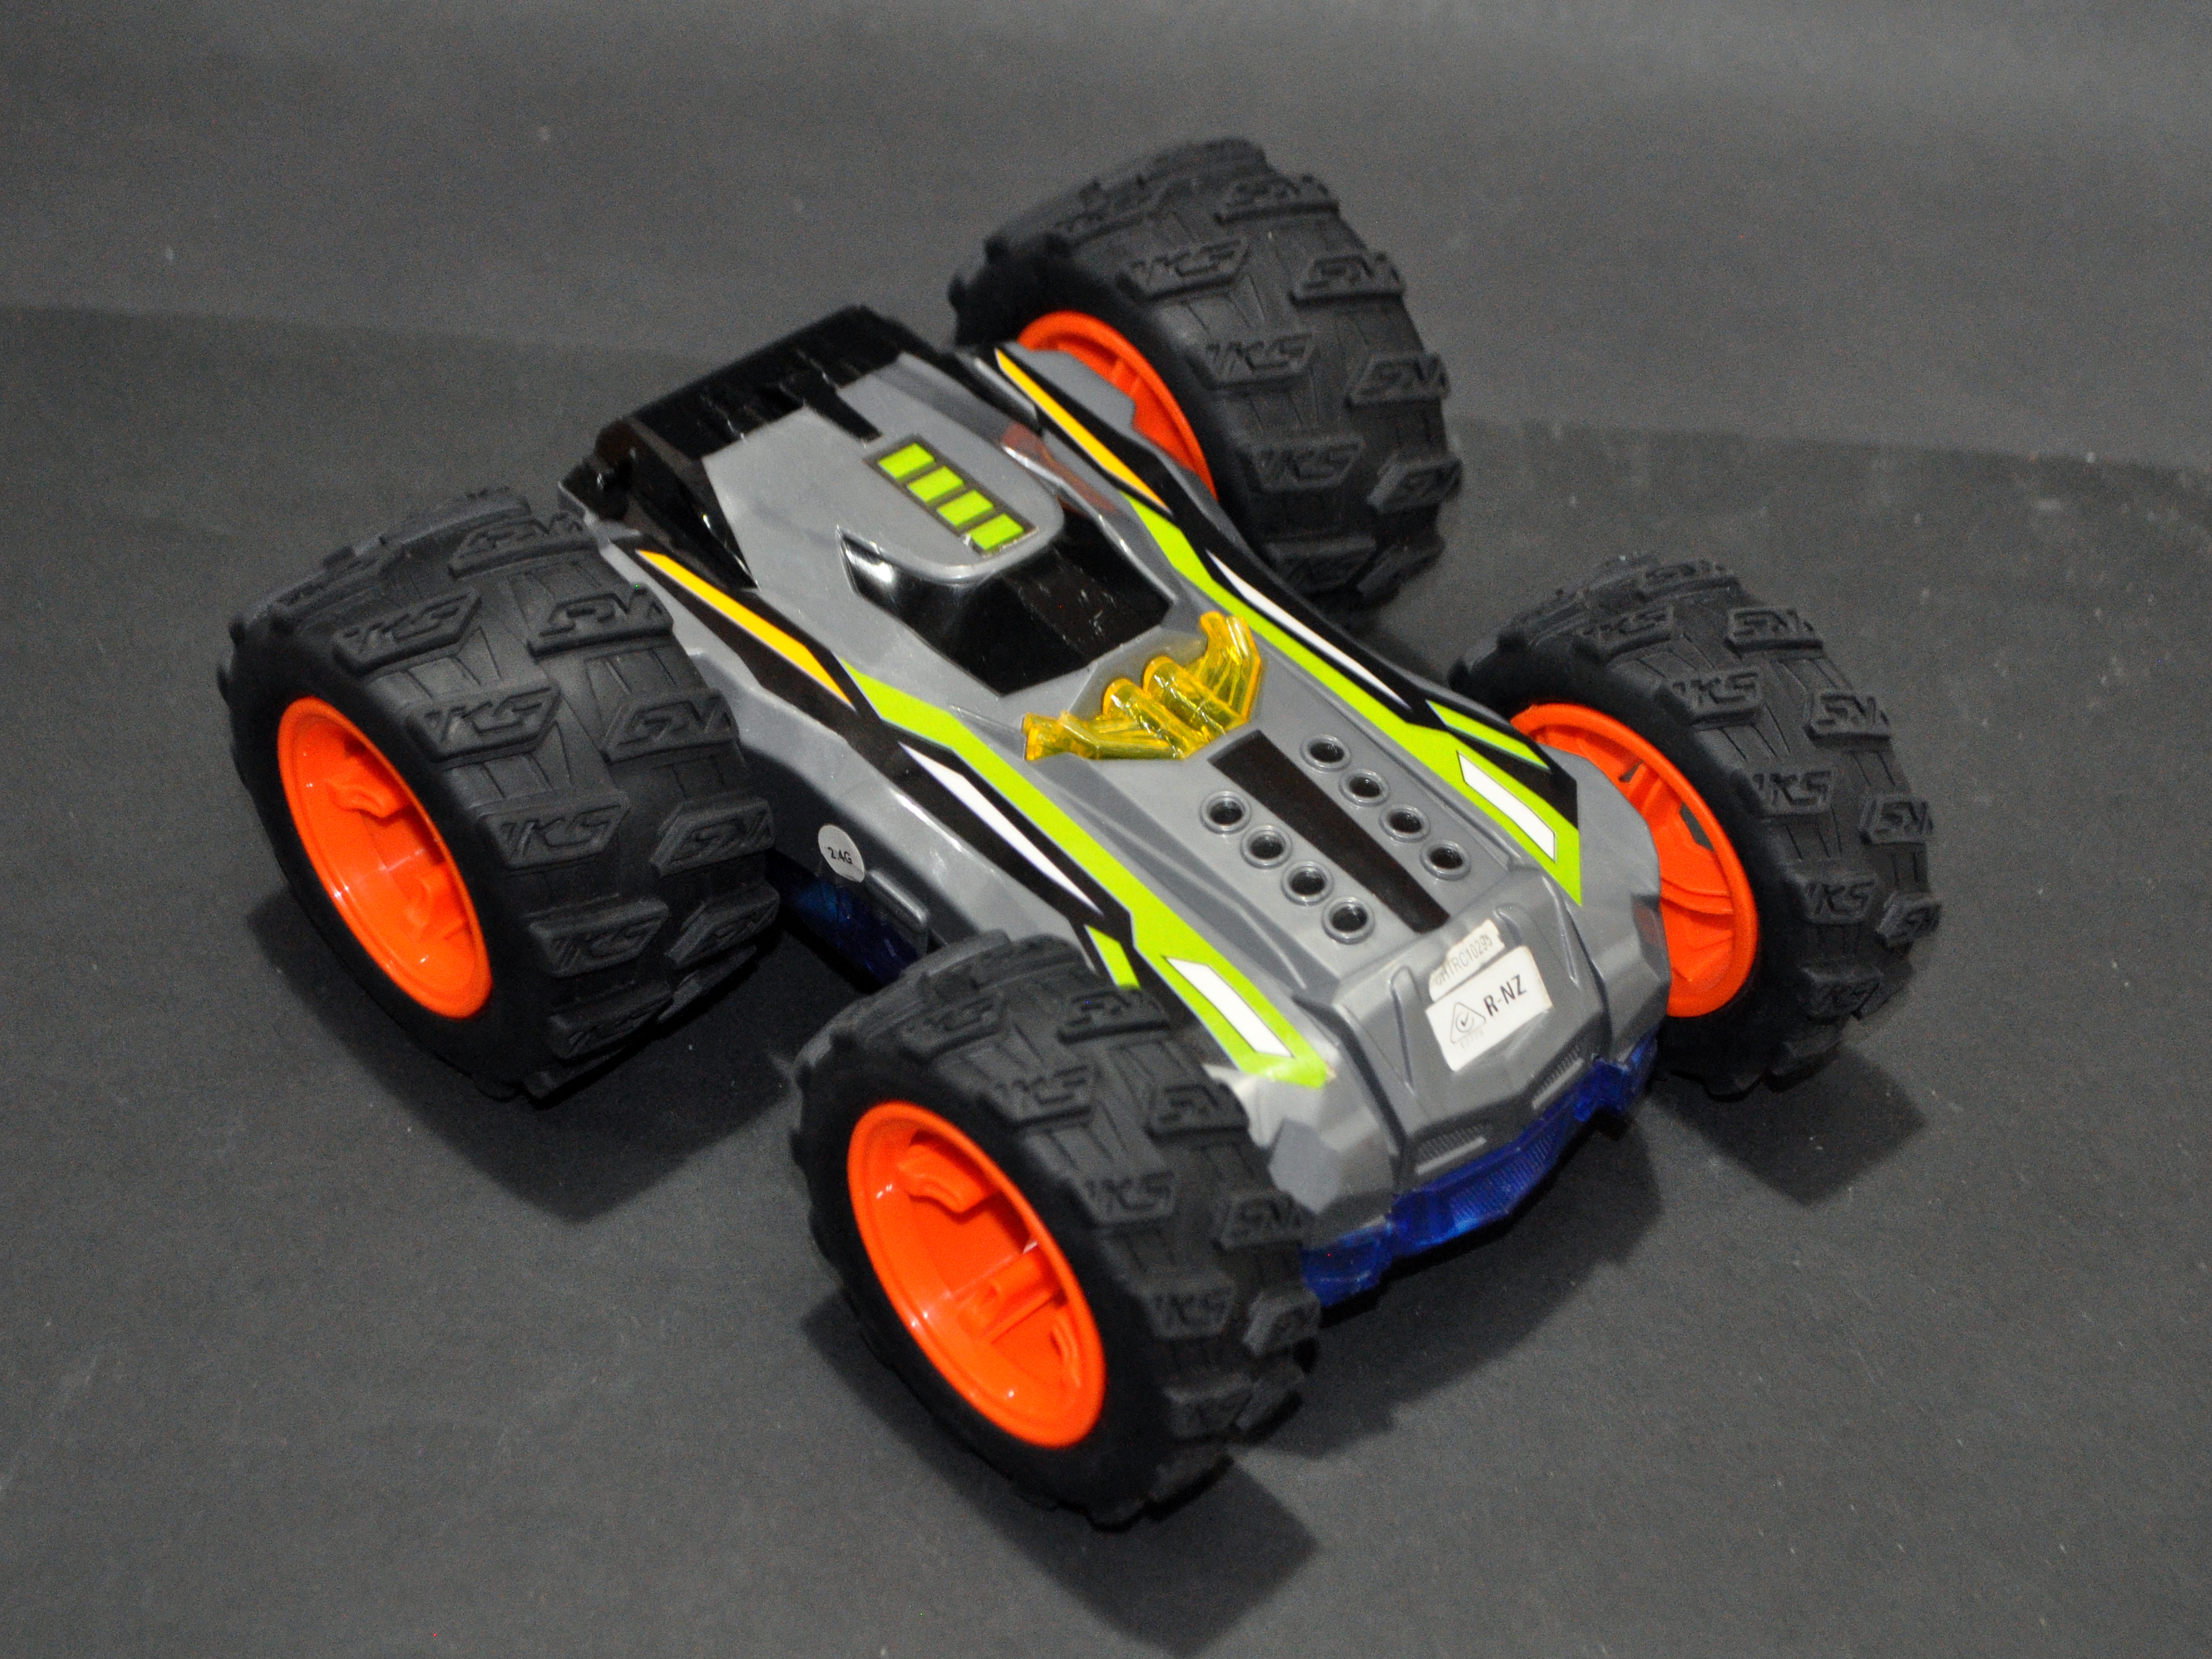 DHTRC10295 Radio Control Car overview